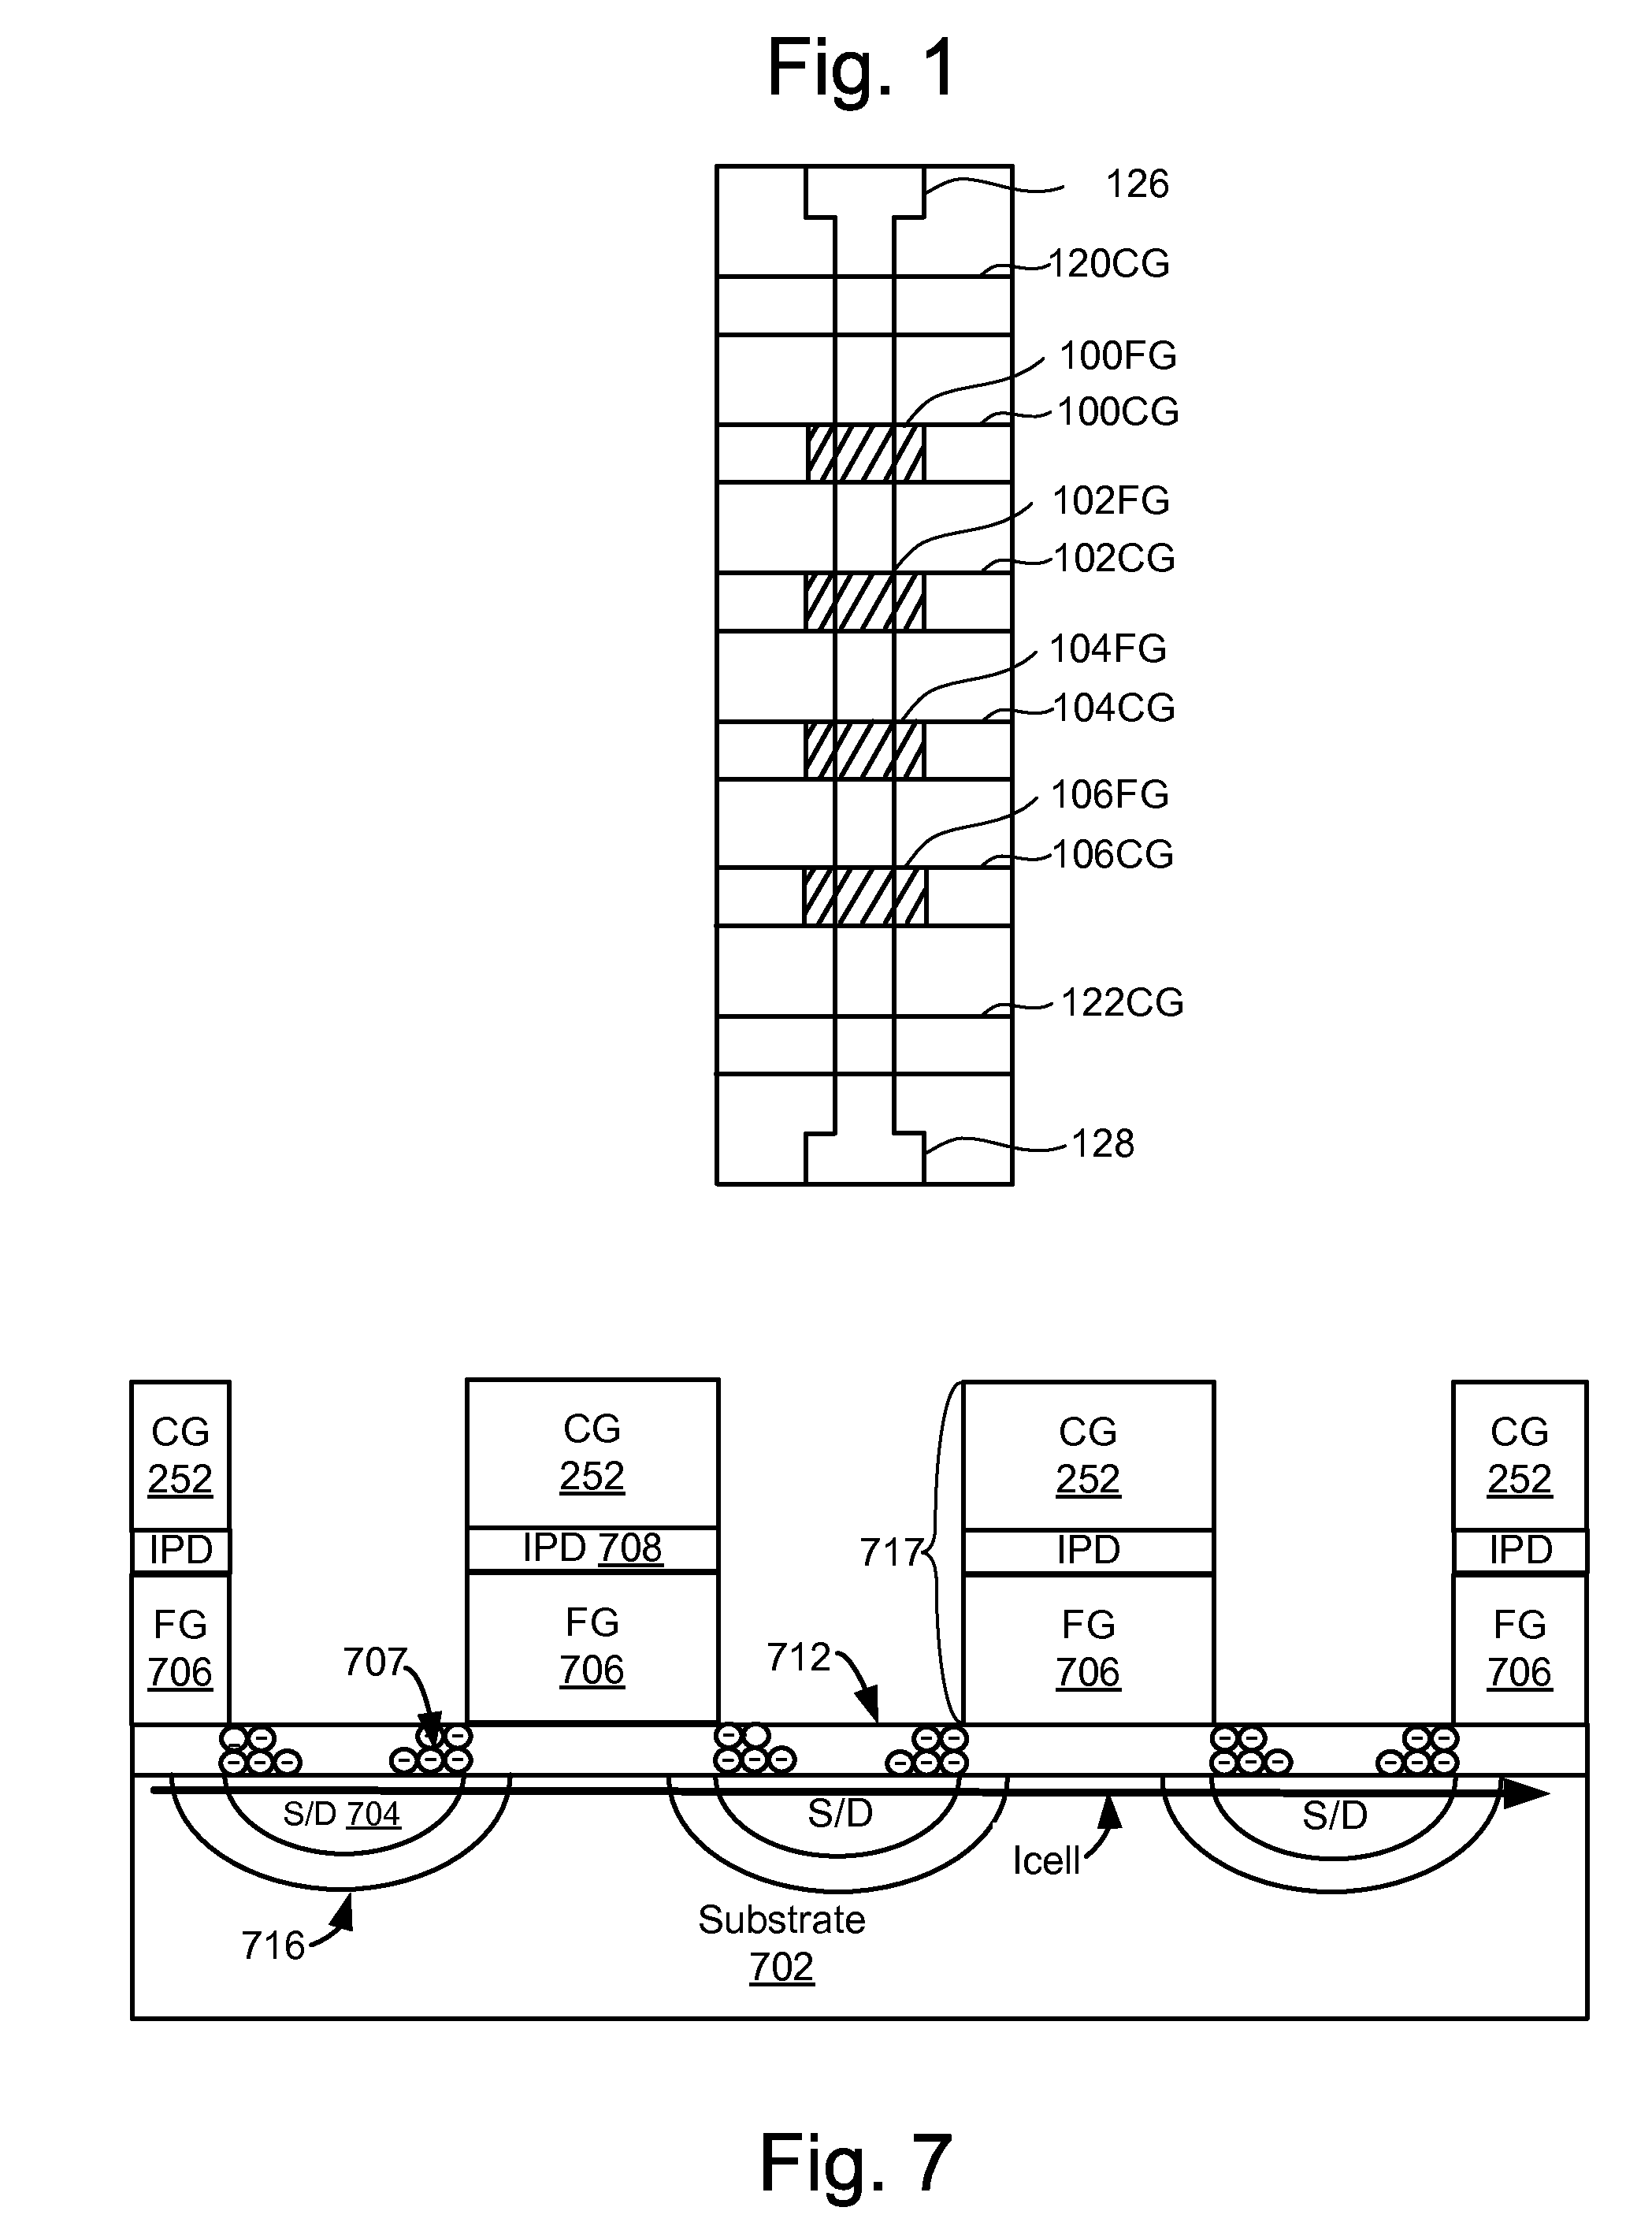 Fabricating and operating a memory array having a multi-level cell region and a single-level cell region